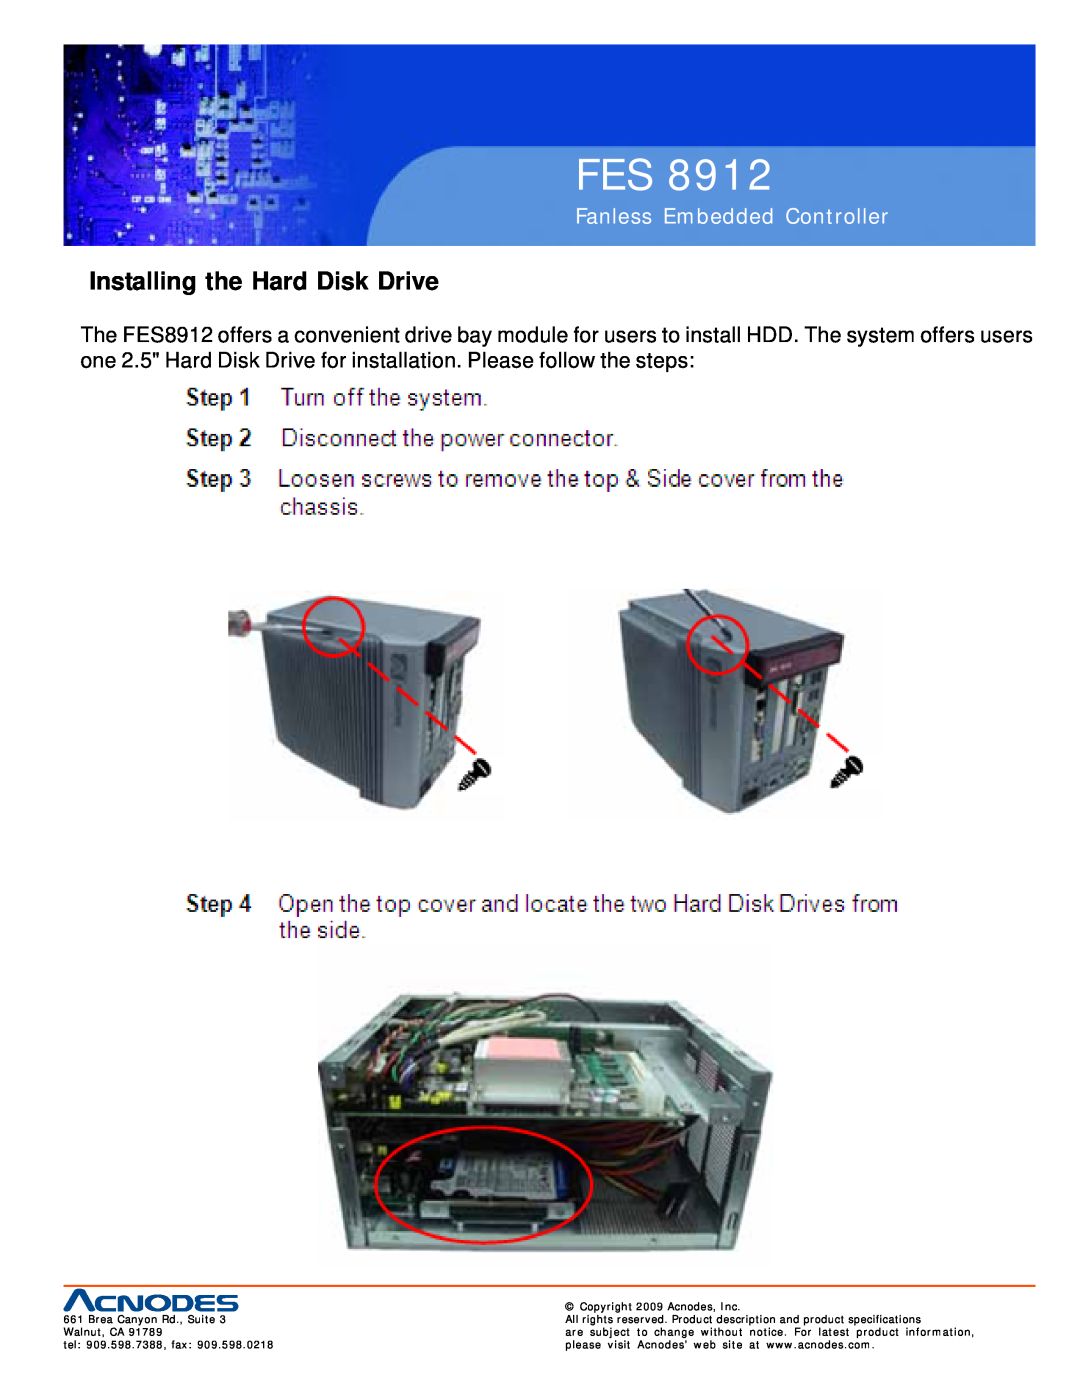 Acnodes FES 8912 specifications Installing the Hard Disk Drive, Fanless Embedded Controller 